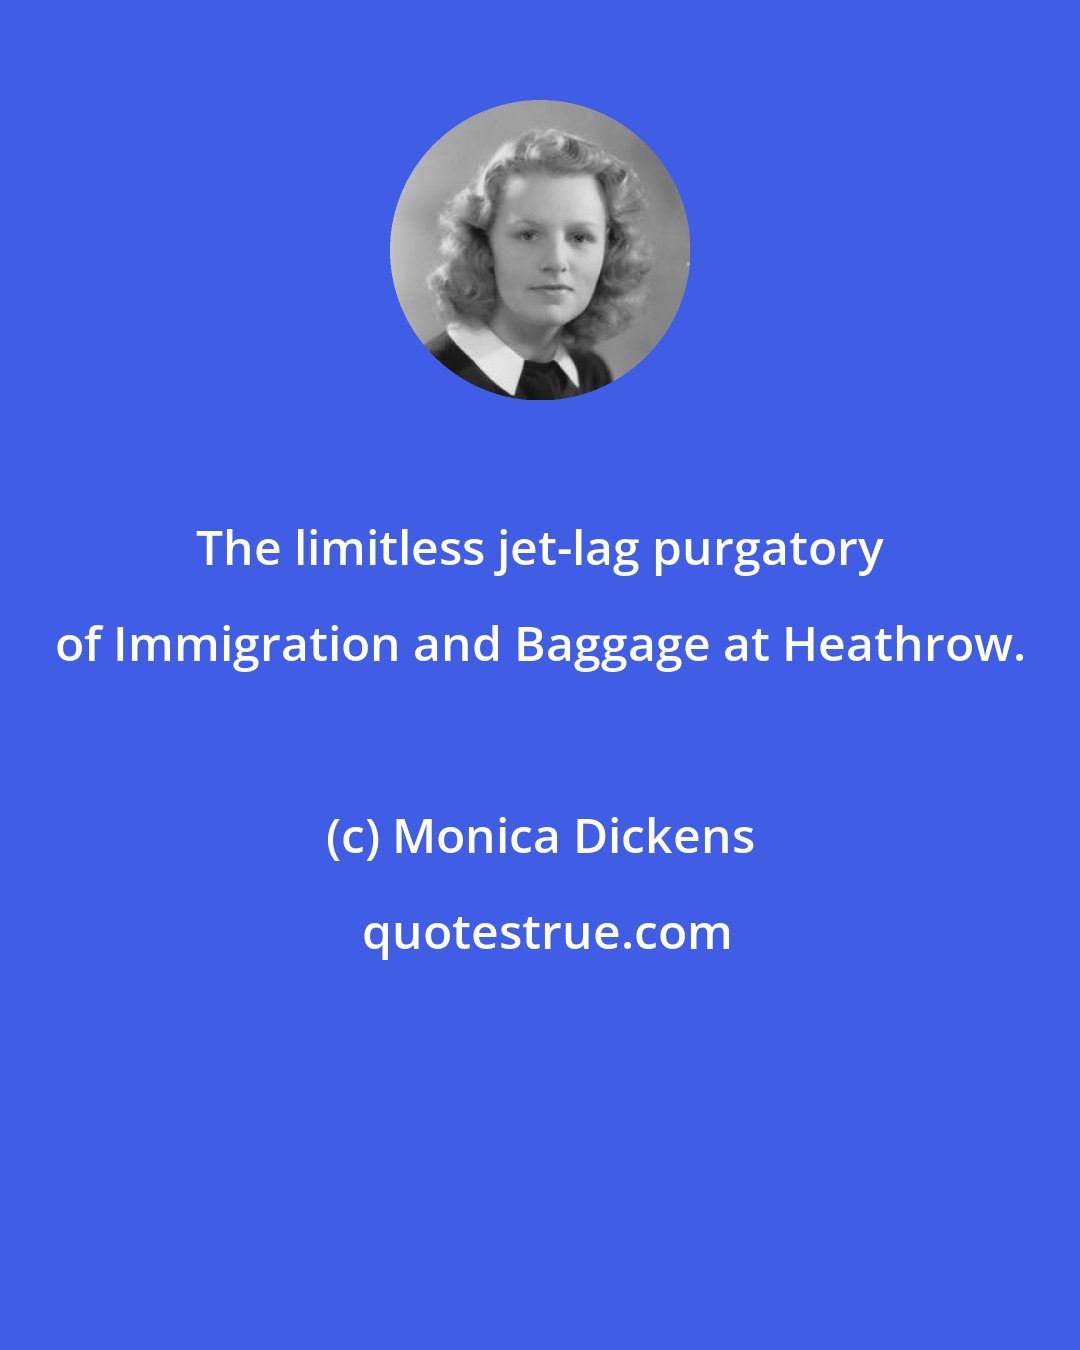 Monica Dickens: The limitless jet-lag purgatory of Immigration and Baggage at Heathrow.